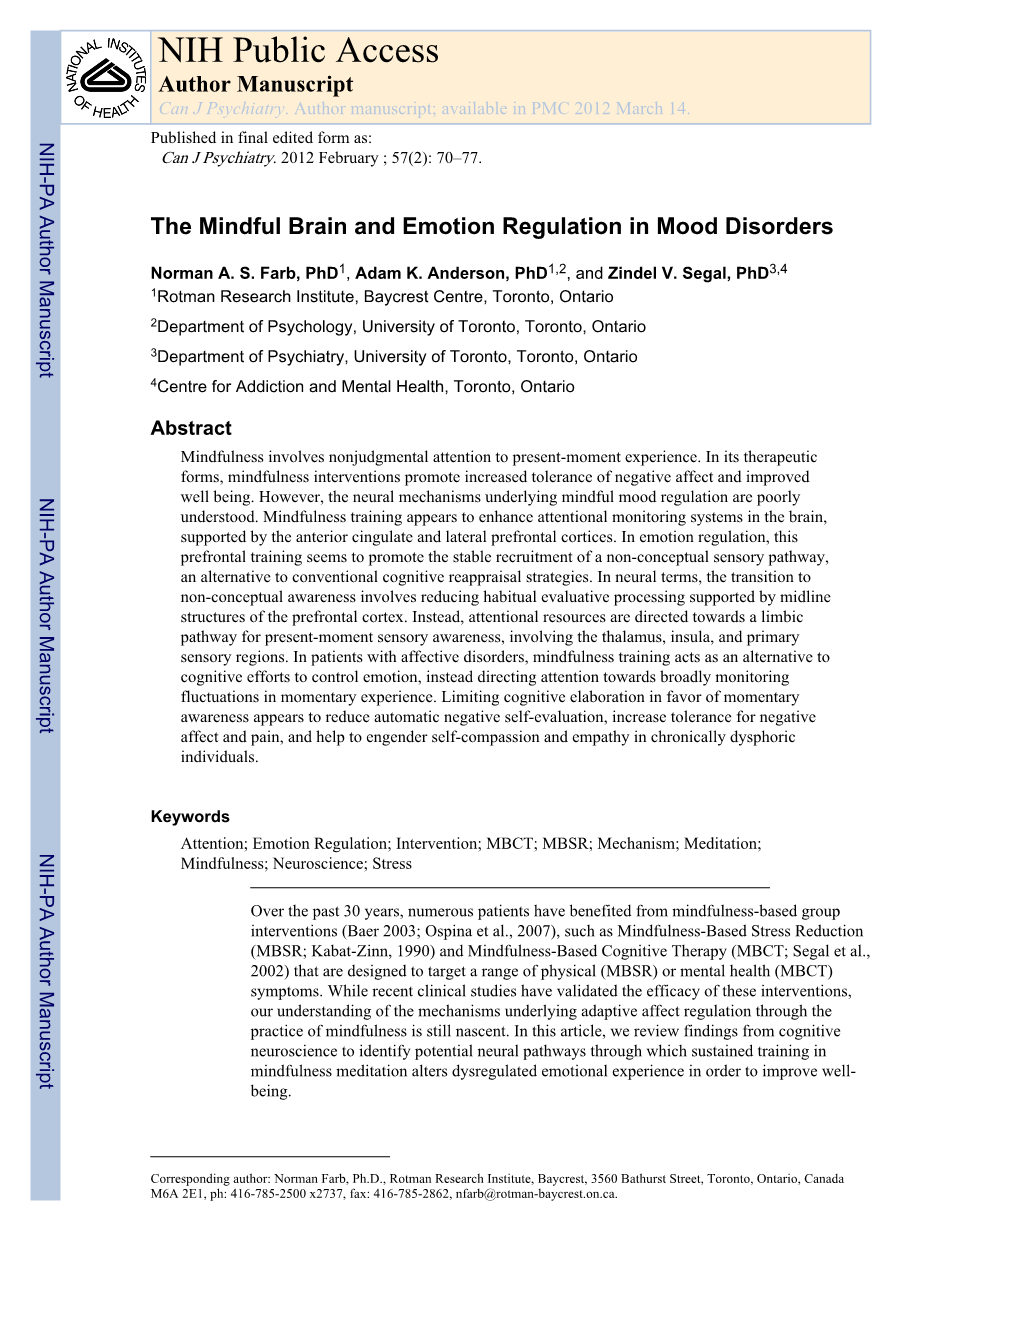 The Mindful Brain and Emotion Regulation in Mood Disorders